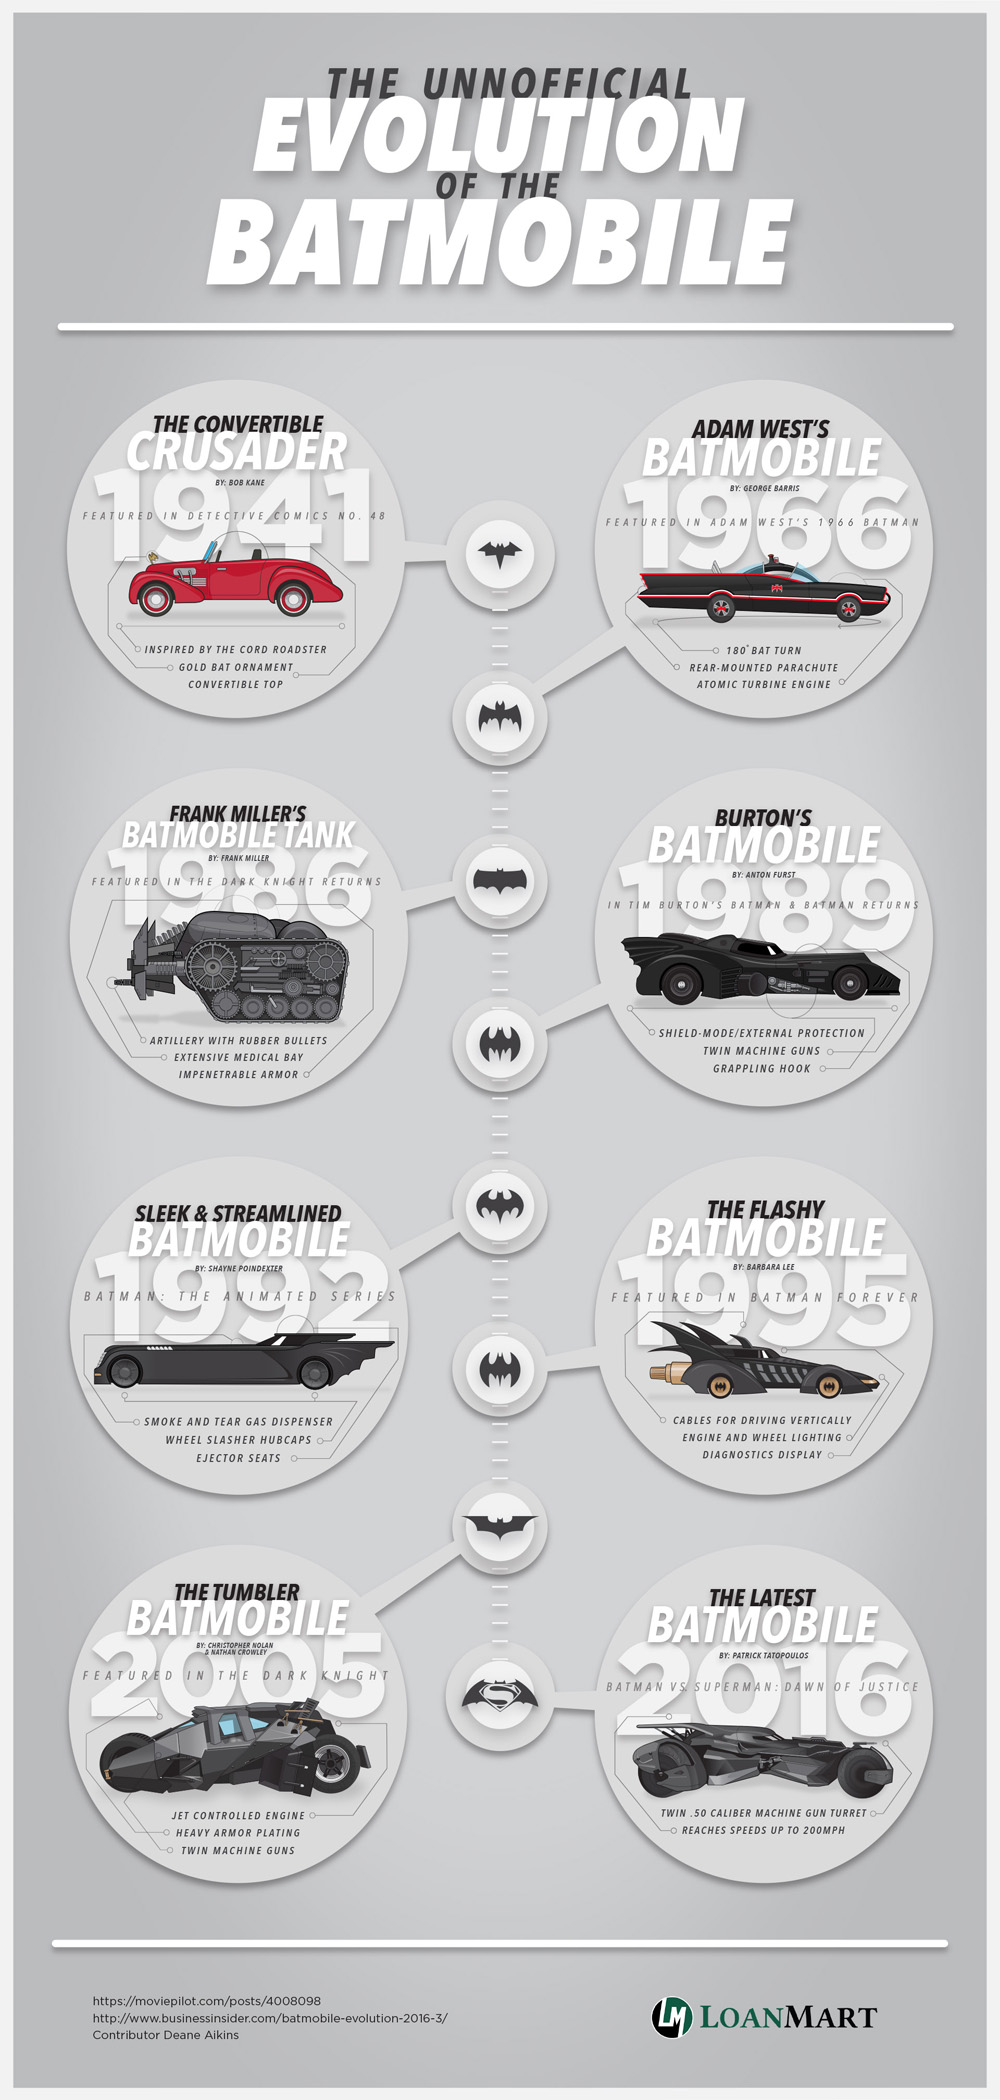 The Unofficial Evolution of the Batmobile